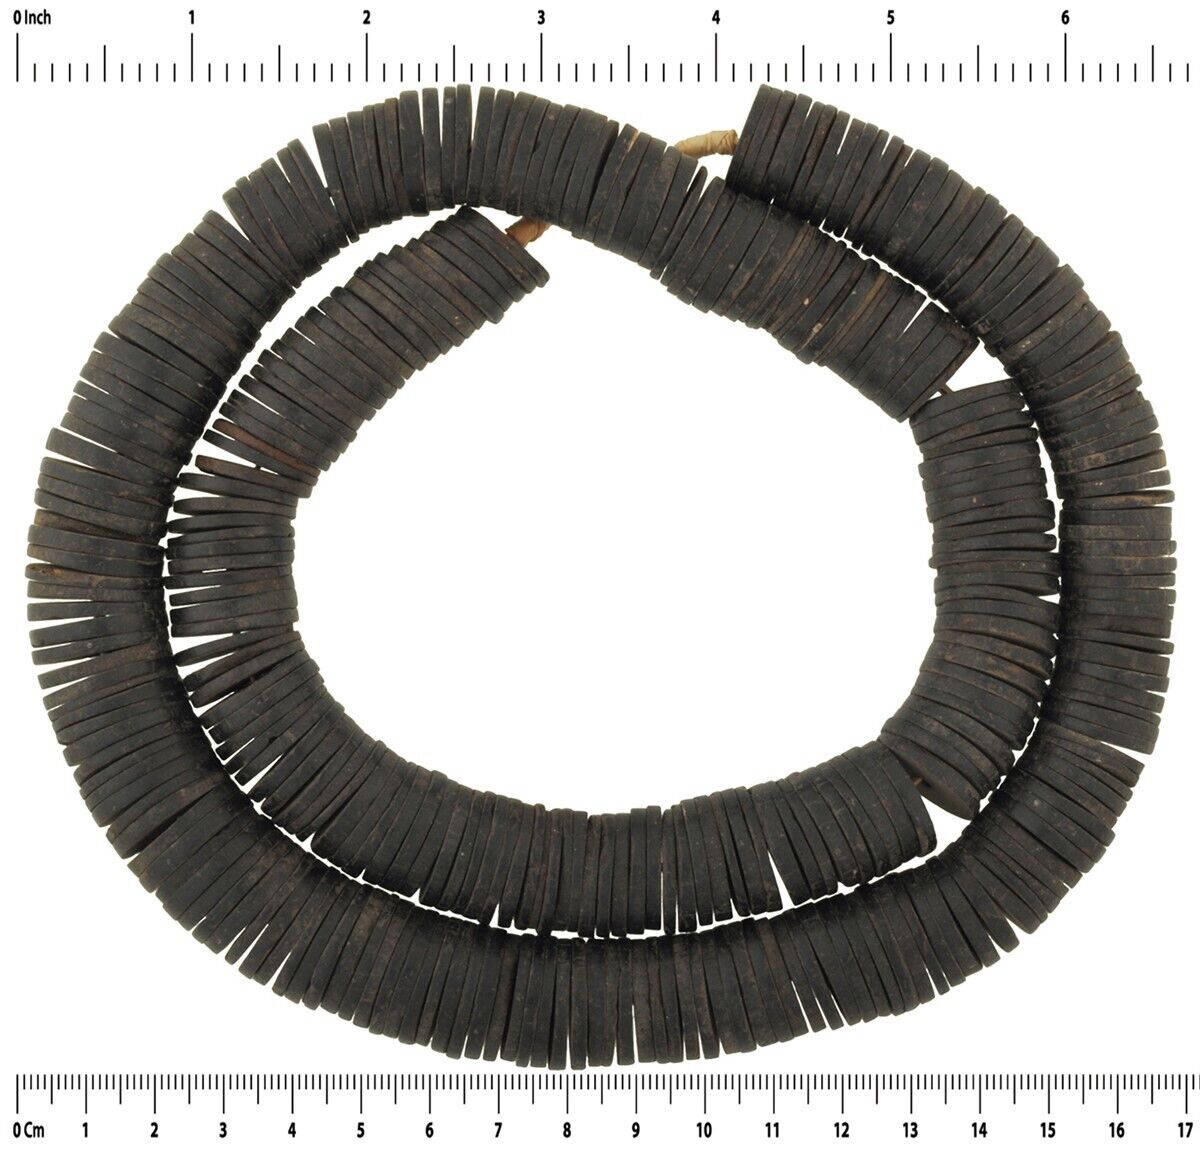 African trade beads old coconut shell slices heishi disks spacers Ghana tribal